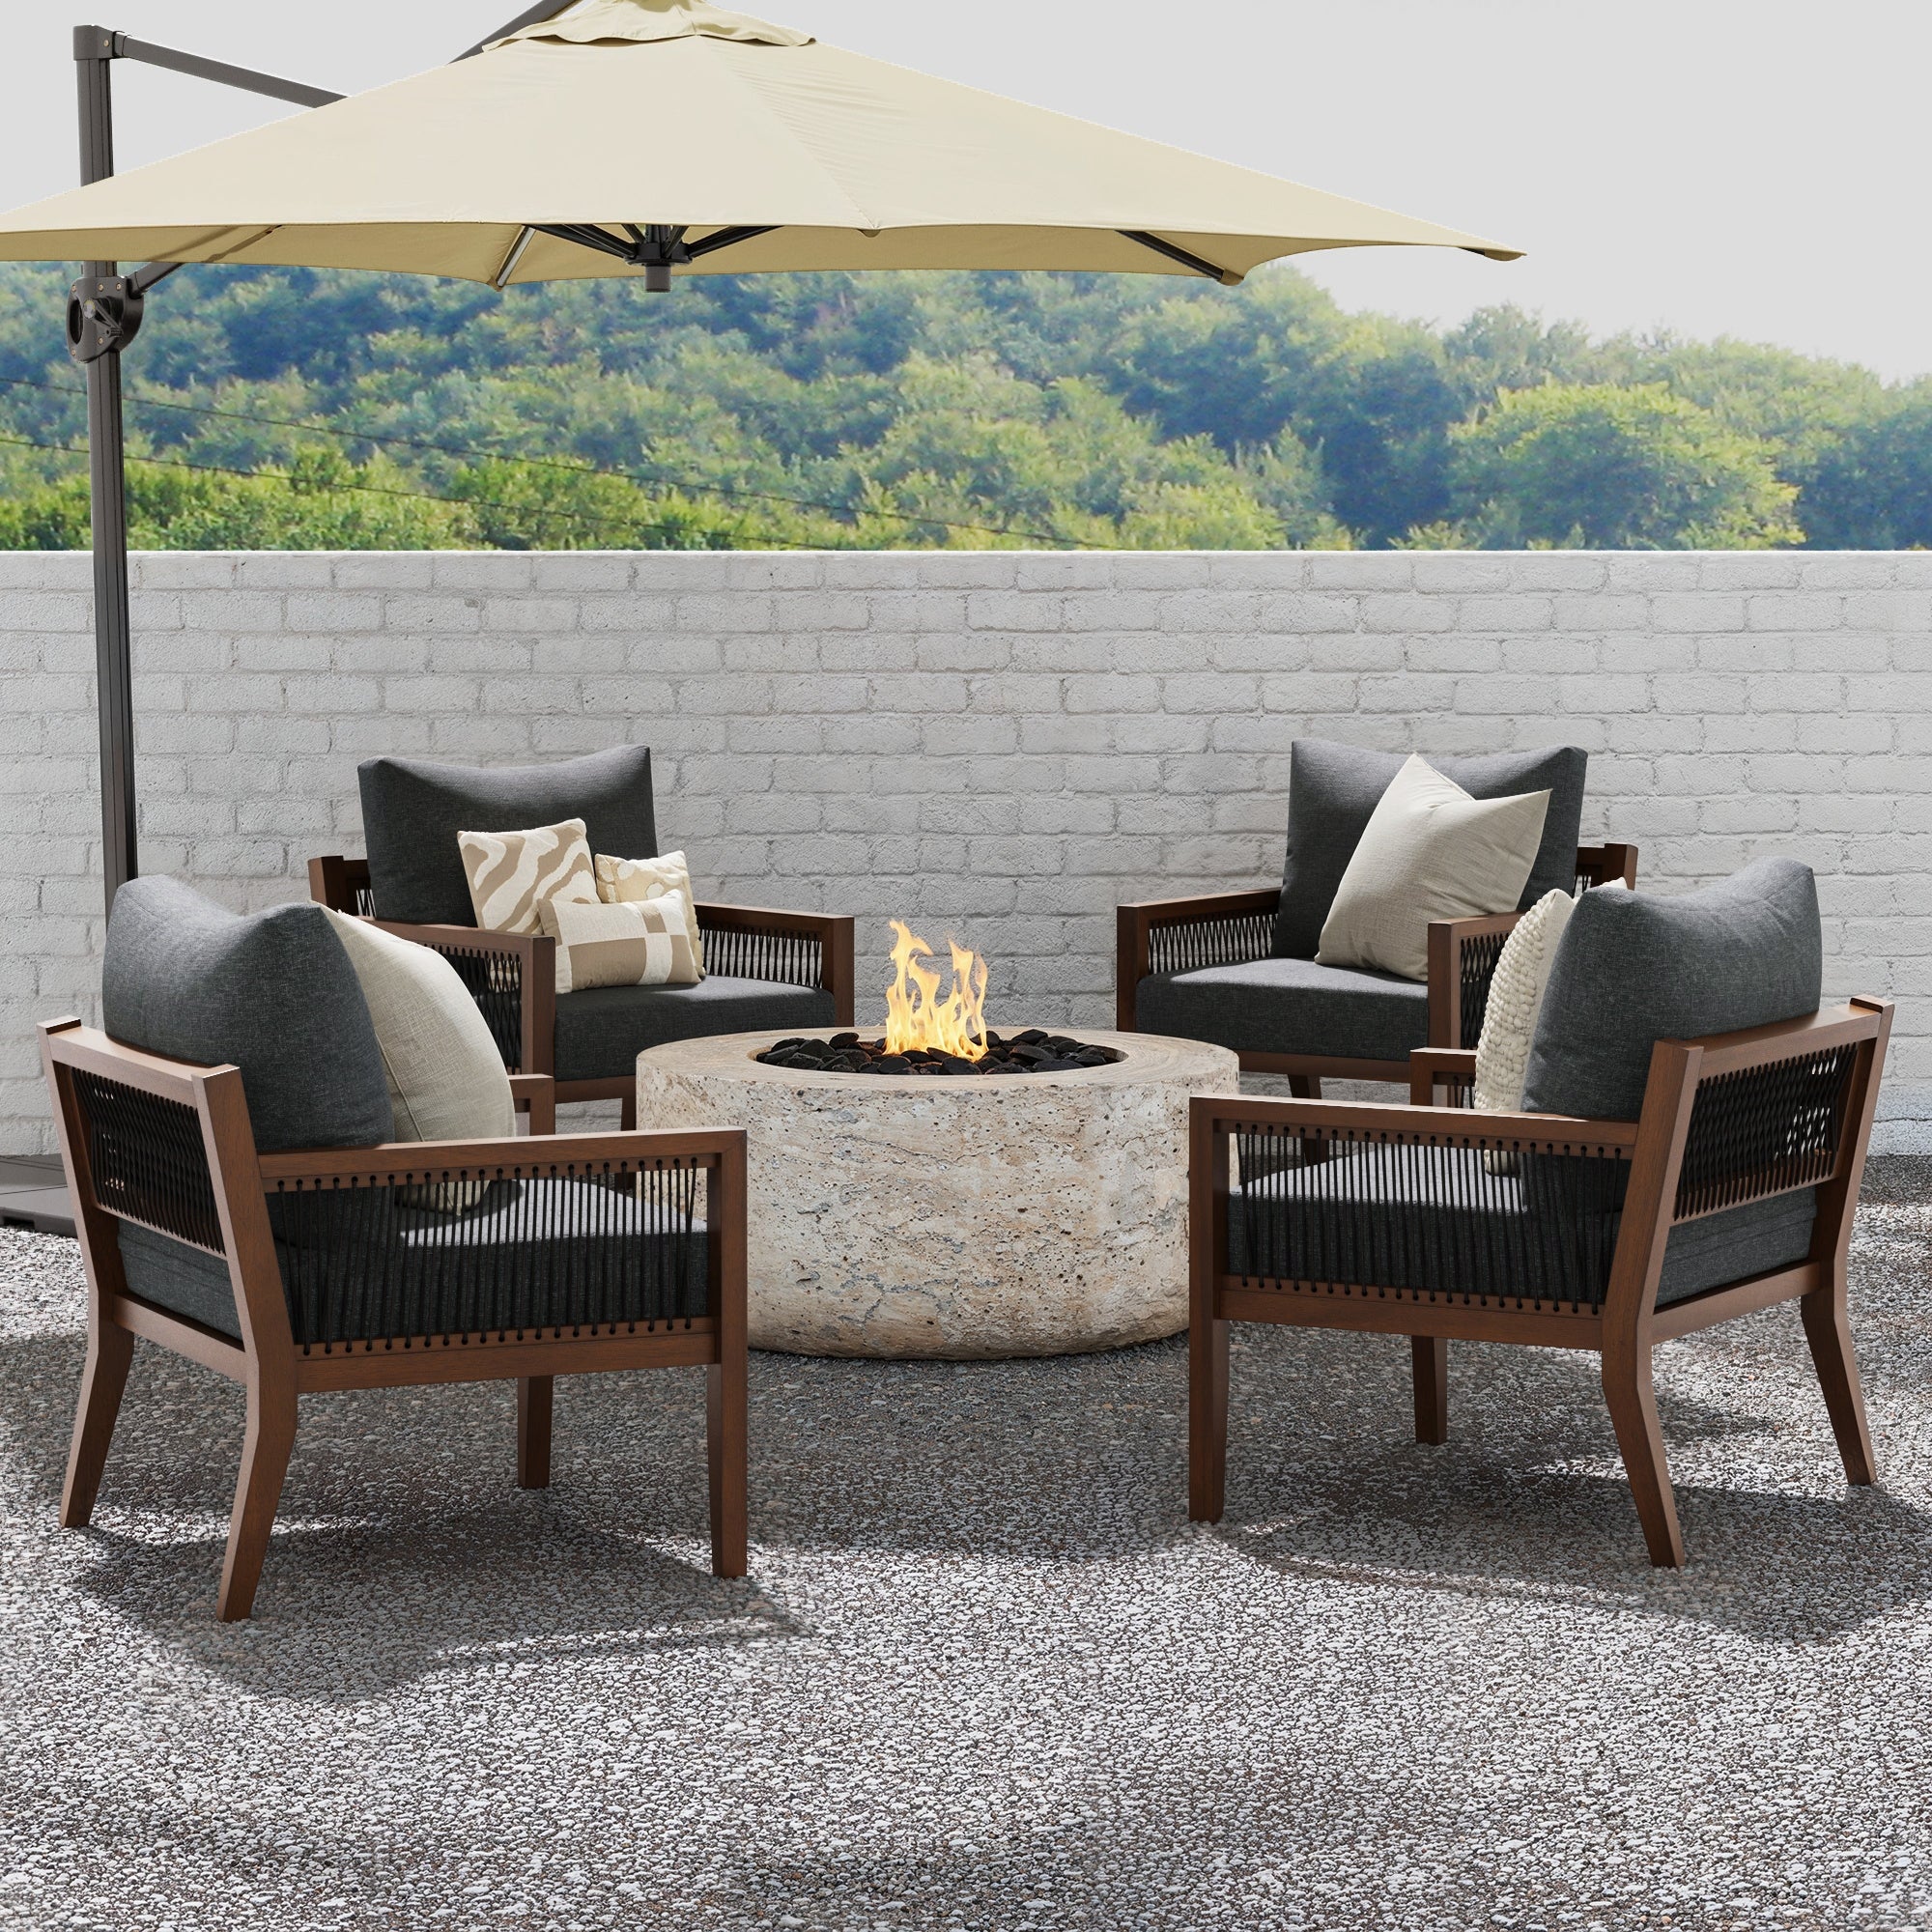 Set of 4 Outdoor Patio Arm Chairs Gray